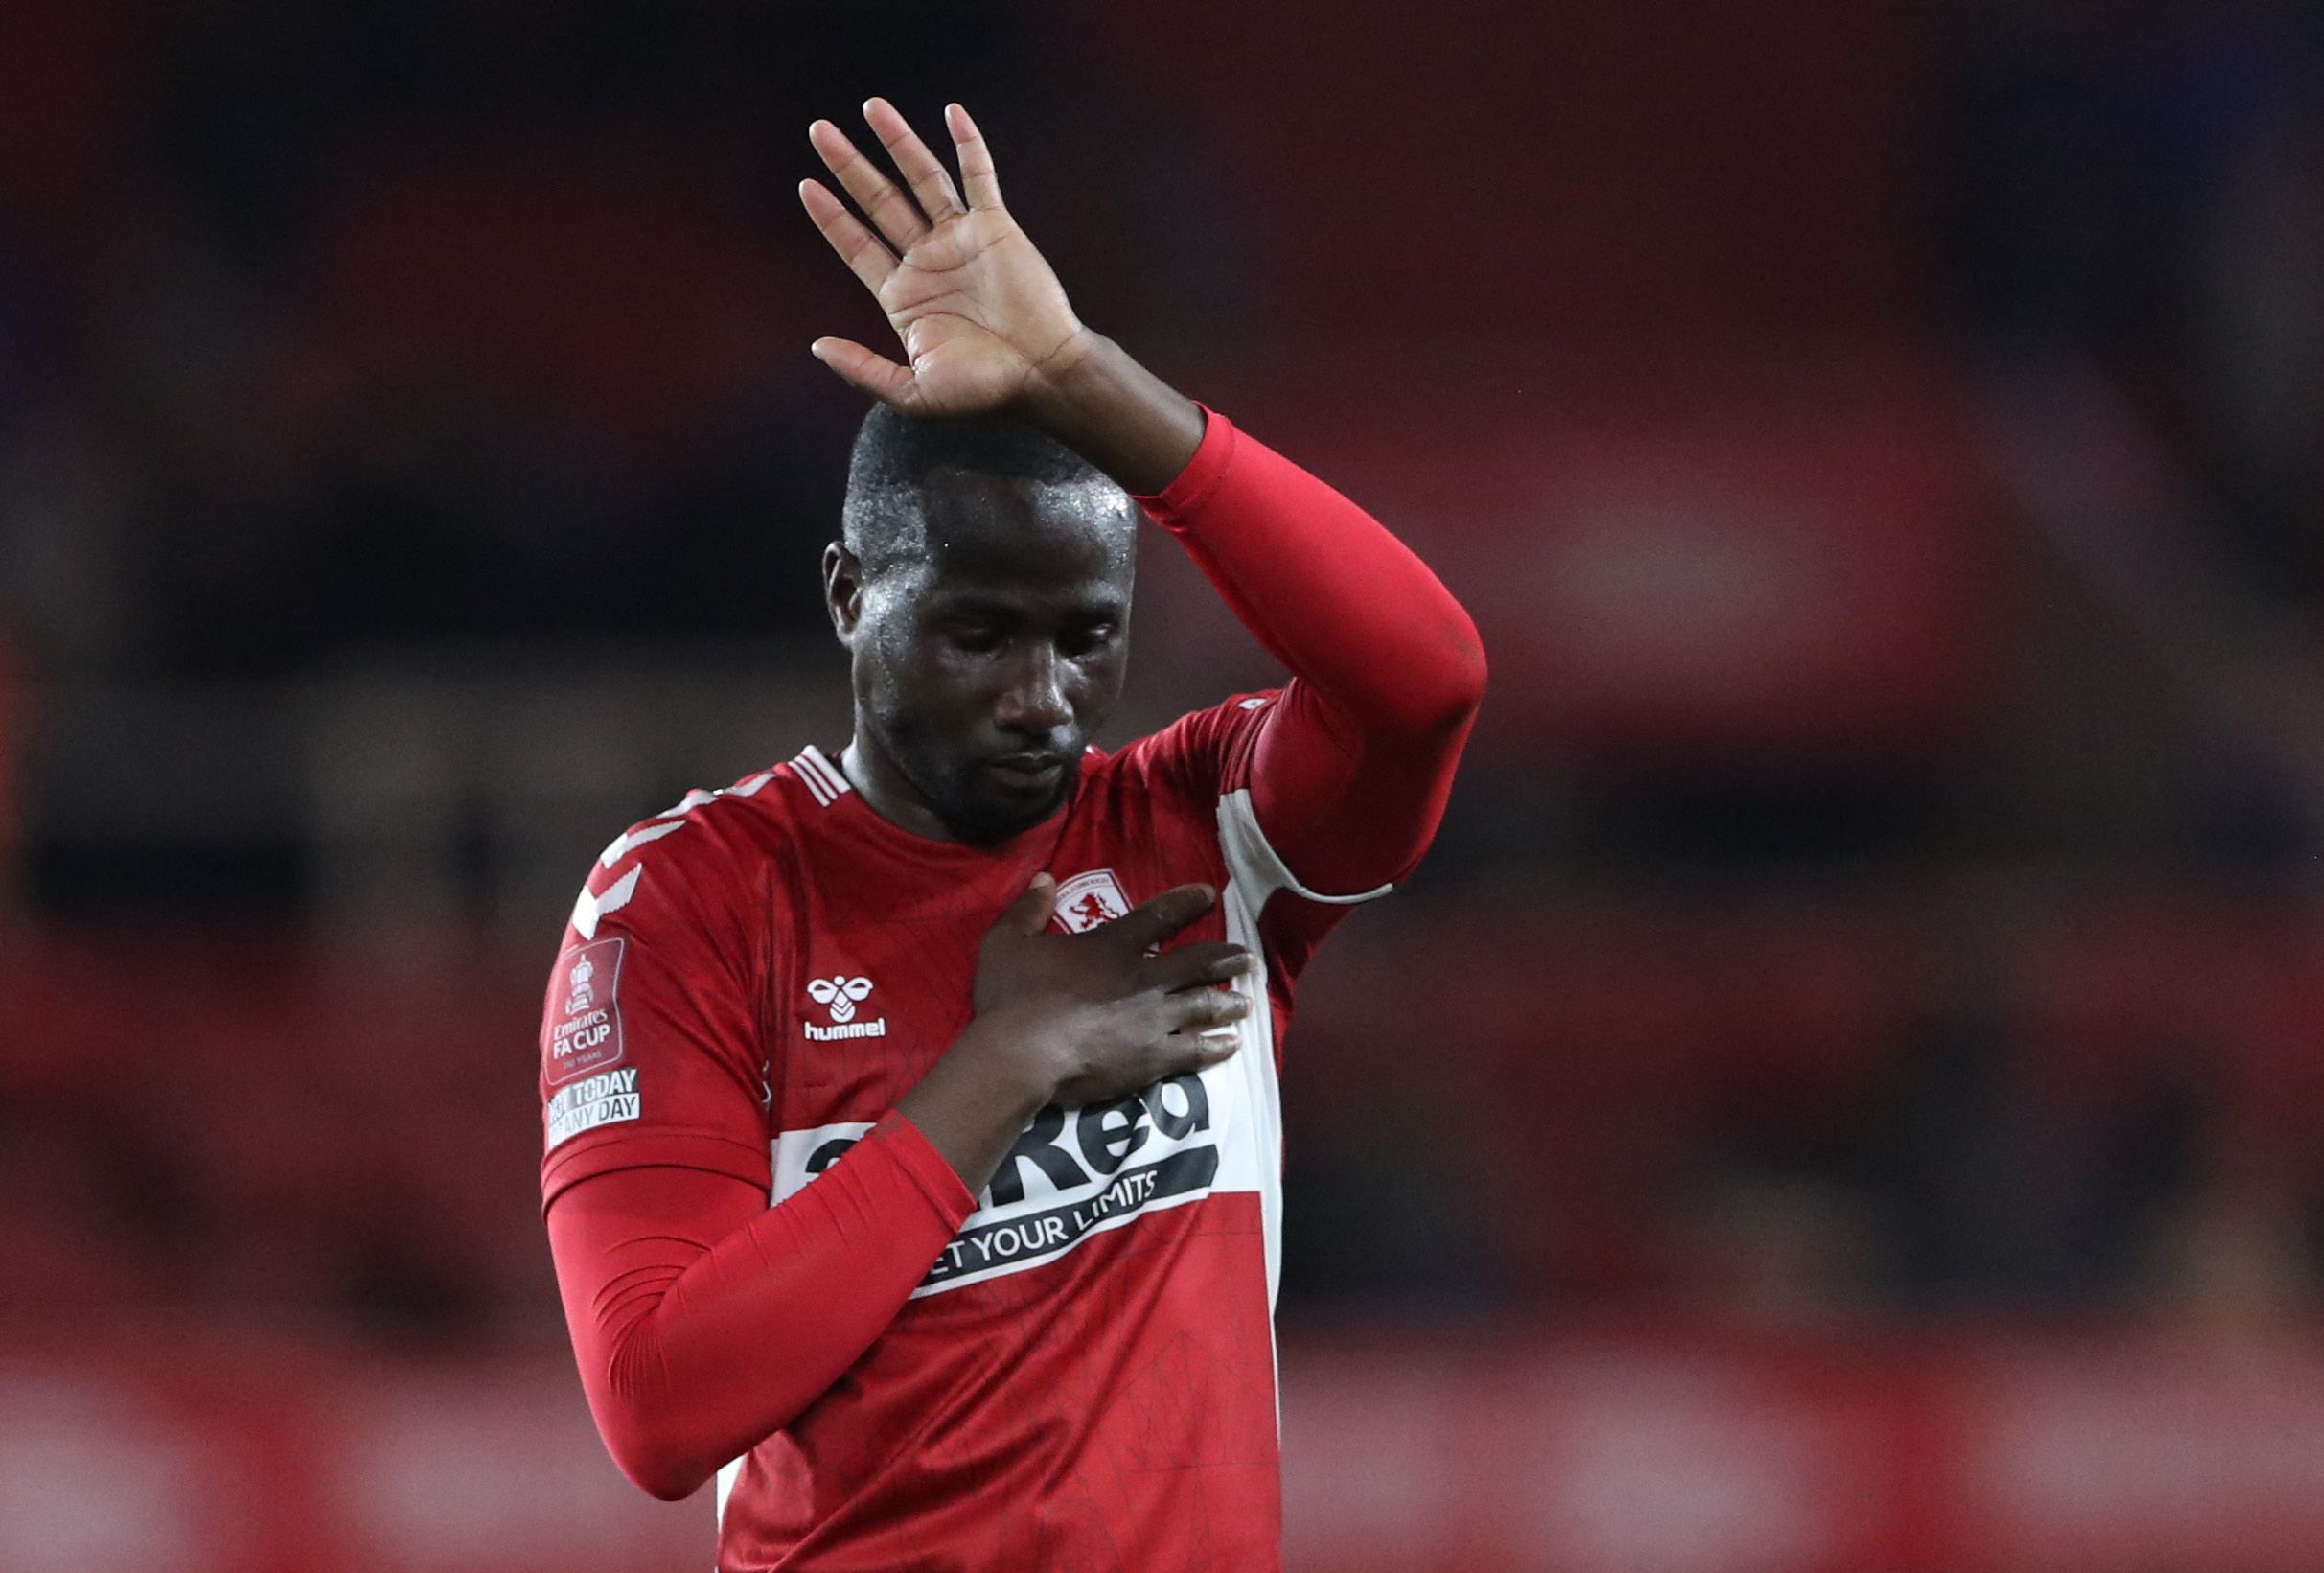 Soccer Football - FA Cup Quarter Final - Middlesbrough v Chelsea - Riverside Stadium, Middlesbrough, Britain - March 19, 2022 Middlesbrough's Sol Bamba reacts REUTERS/Scott Heppell